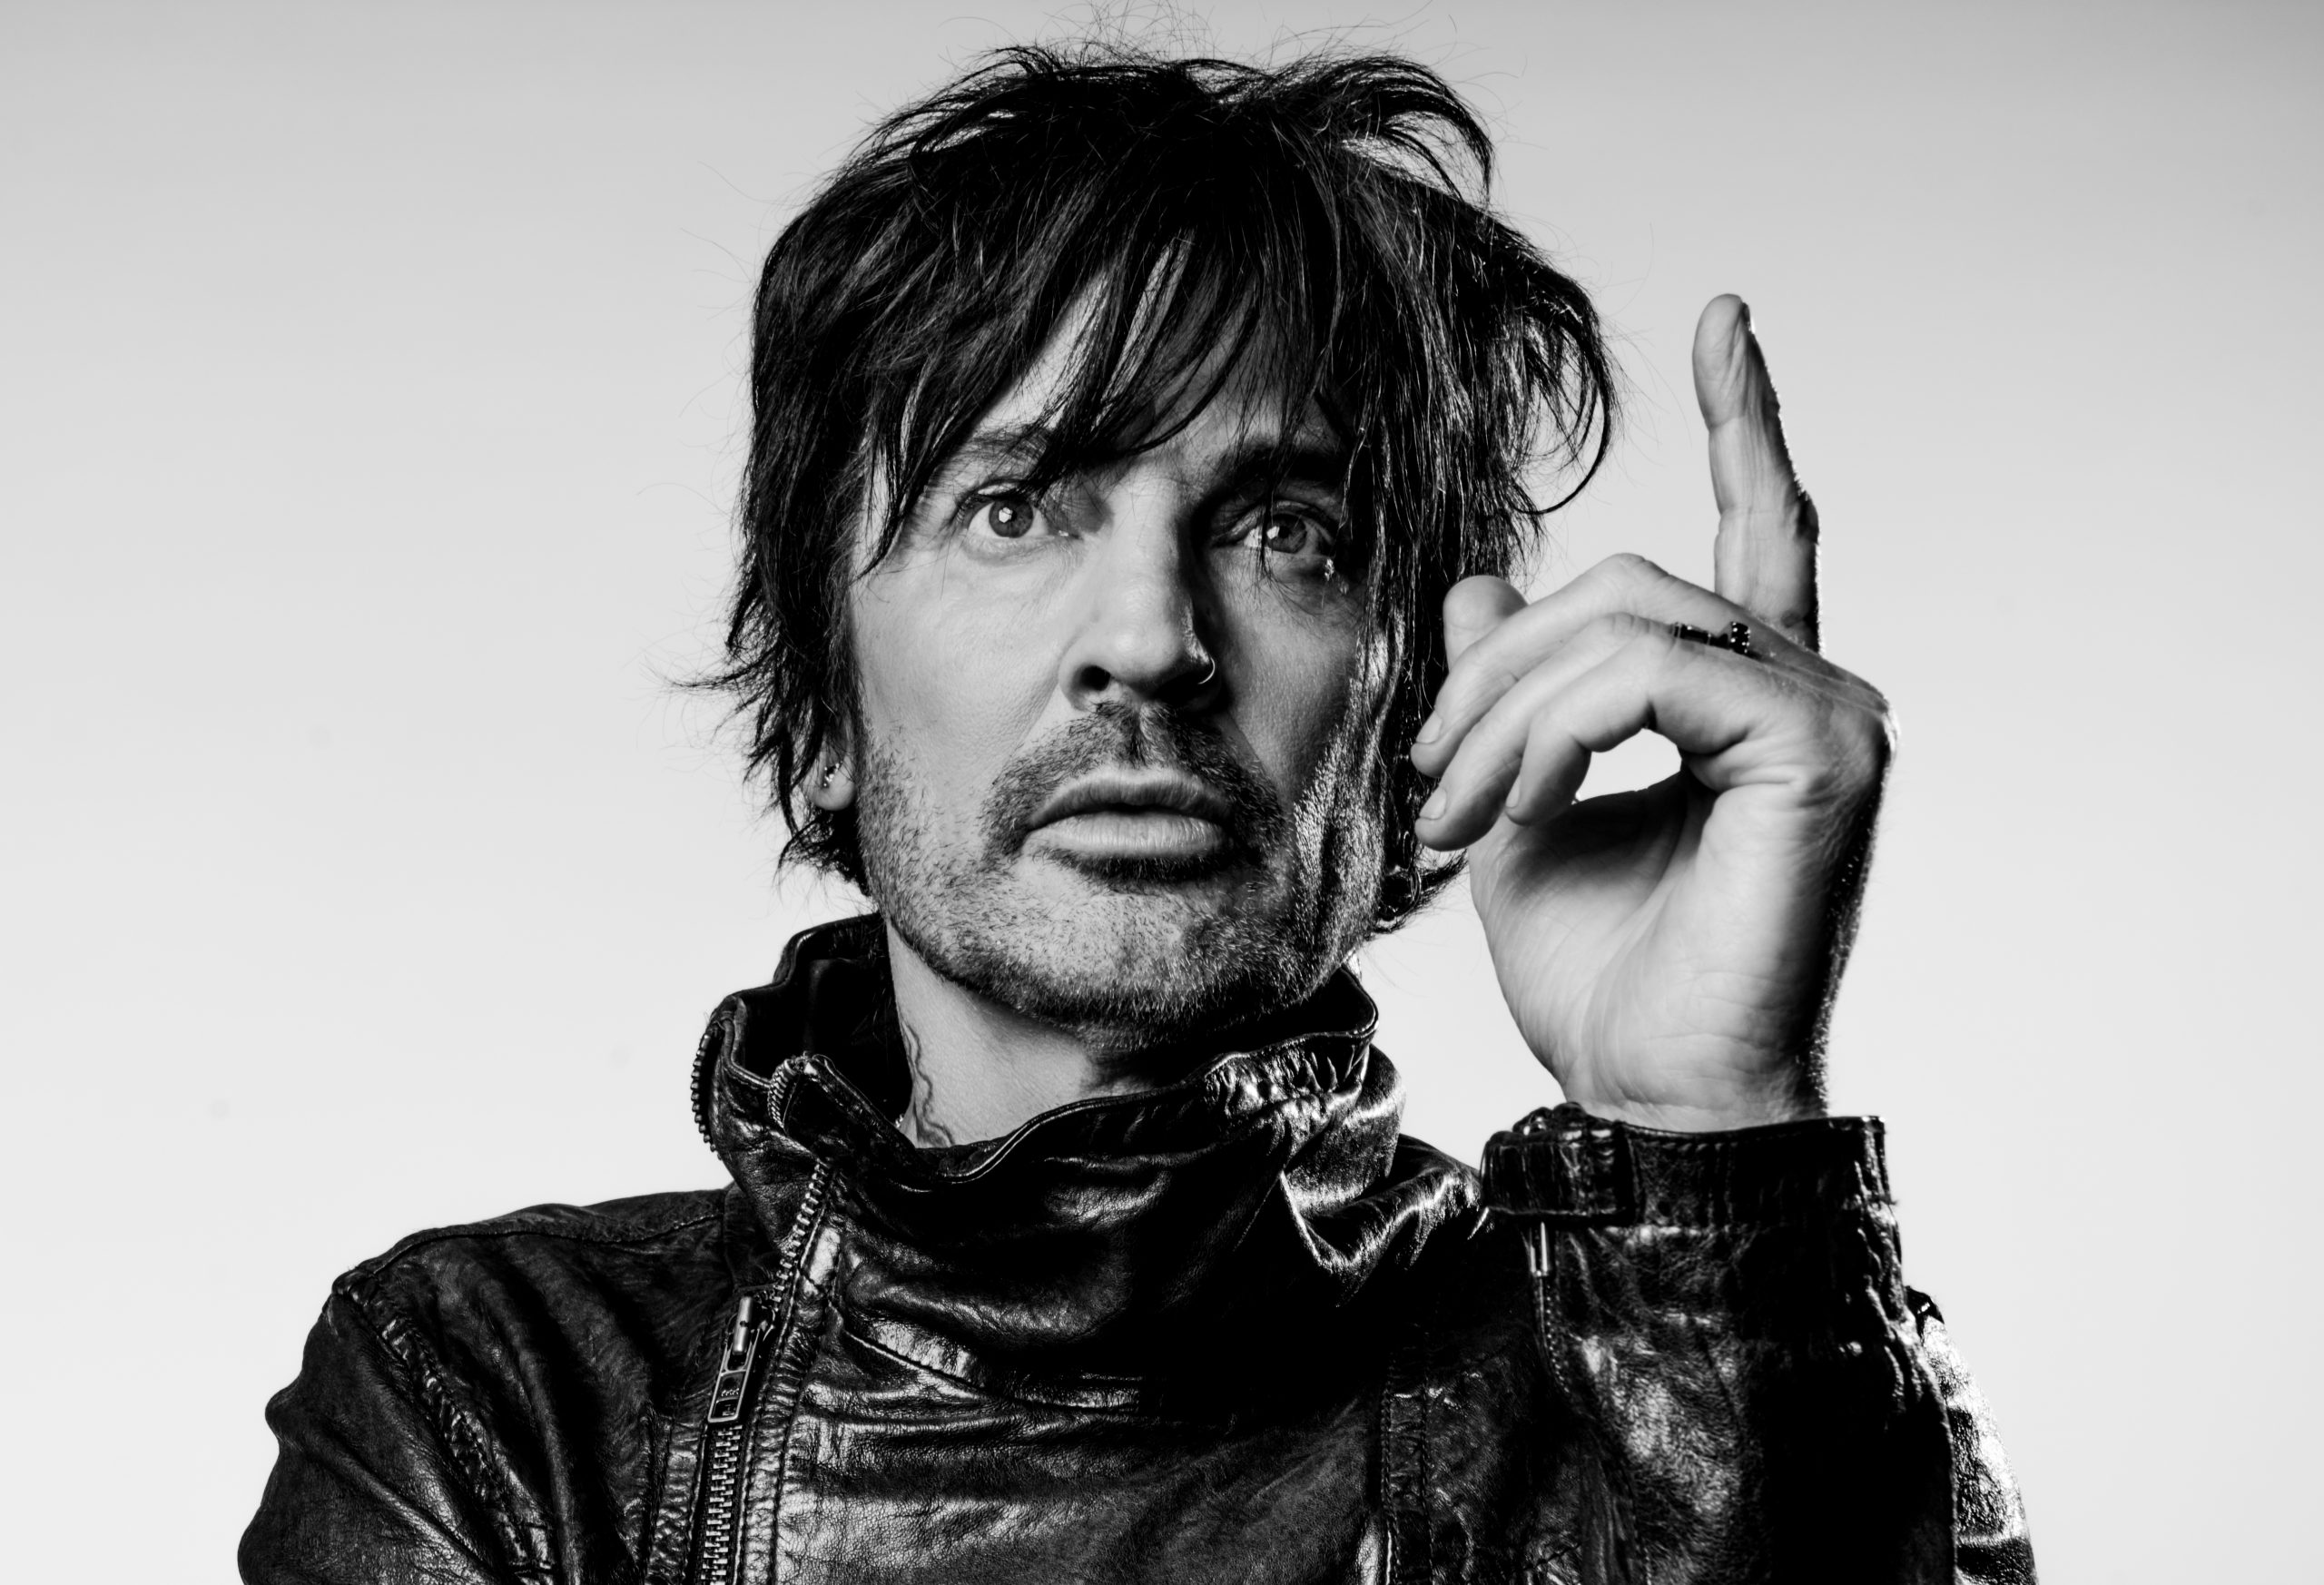 Tommy Lee on the Power of Self and Riding Life at 320 MPH